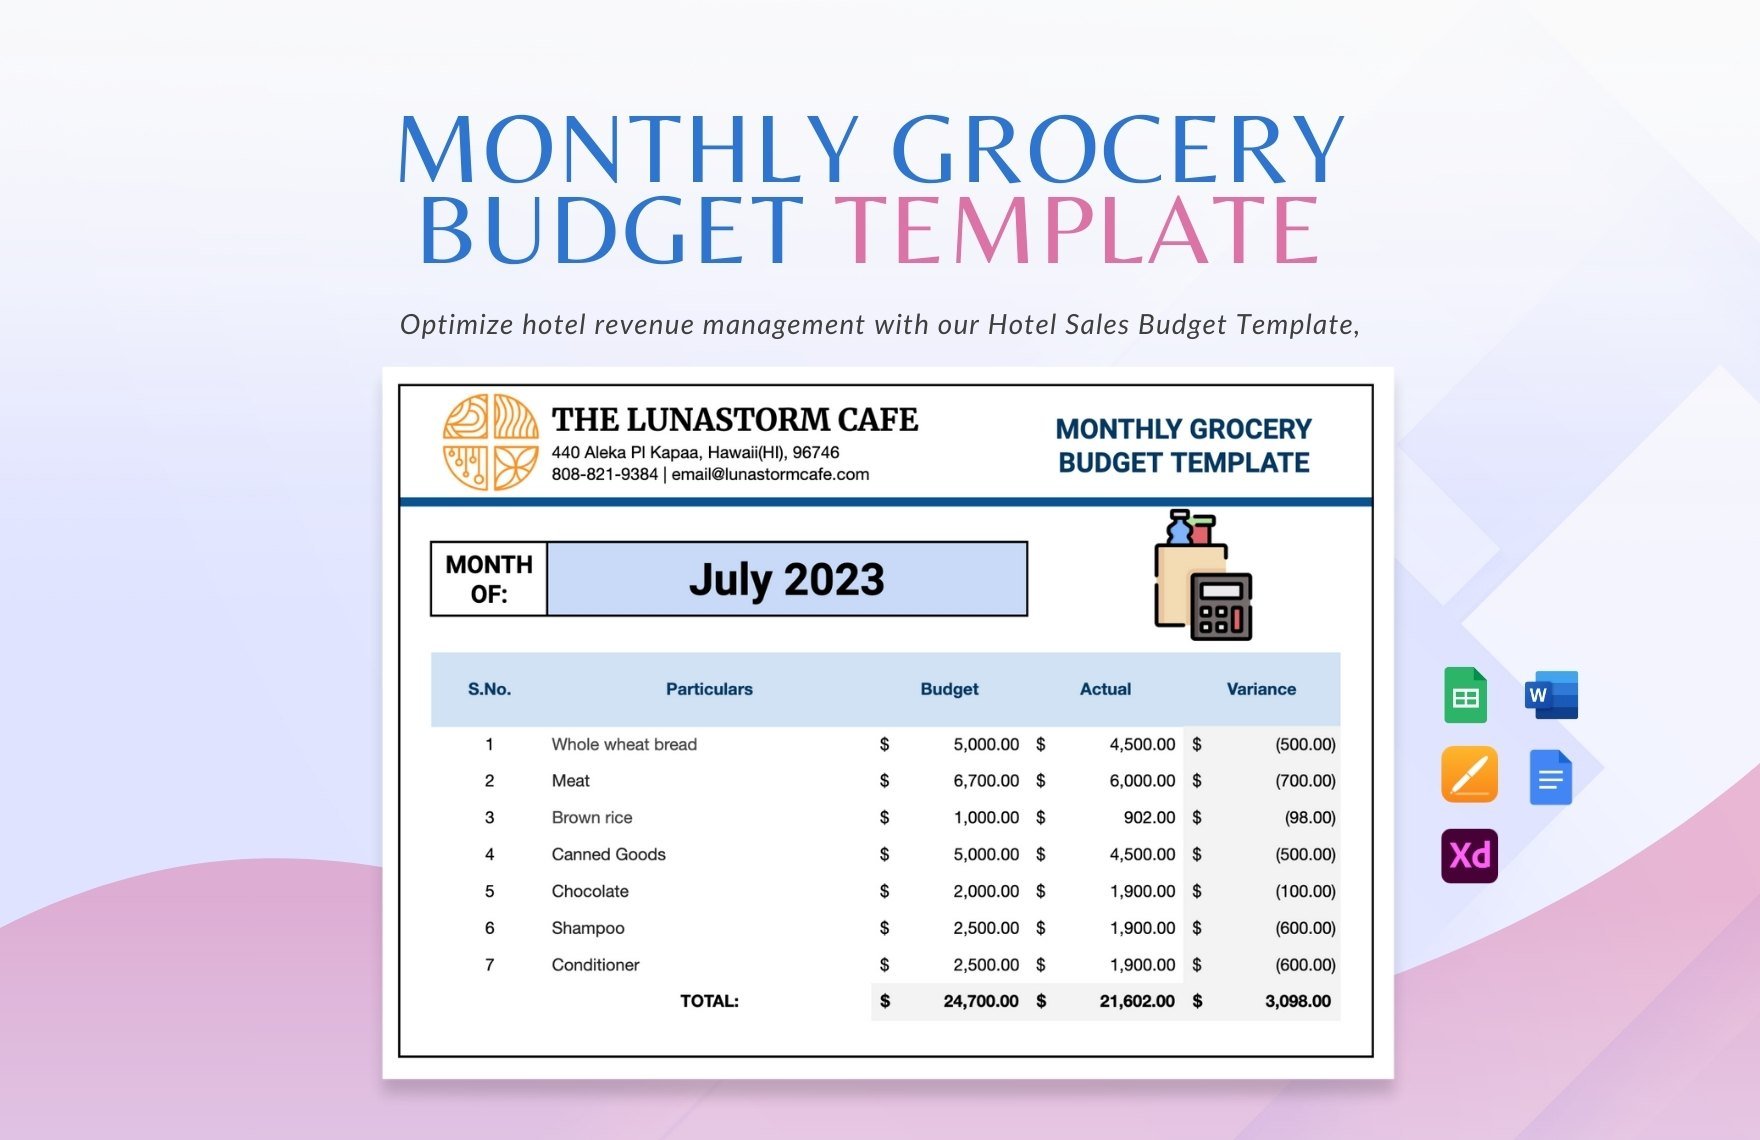 Free Monthly Grocery Budget Template in Word, Google Docs, Google Sheets, Apple Pages, Adobe XD